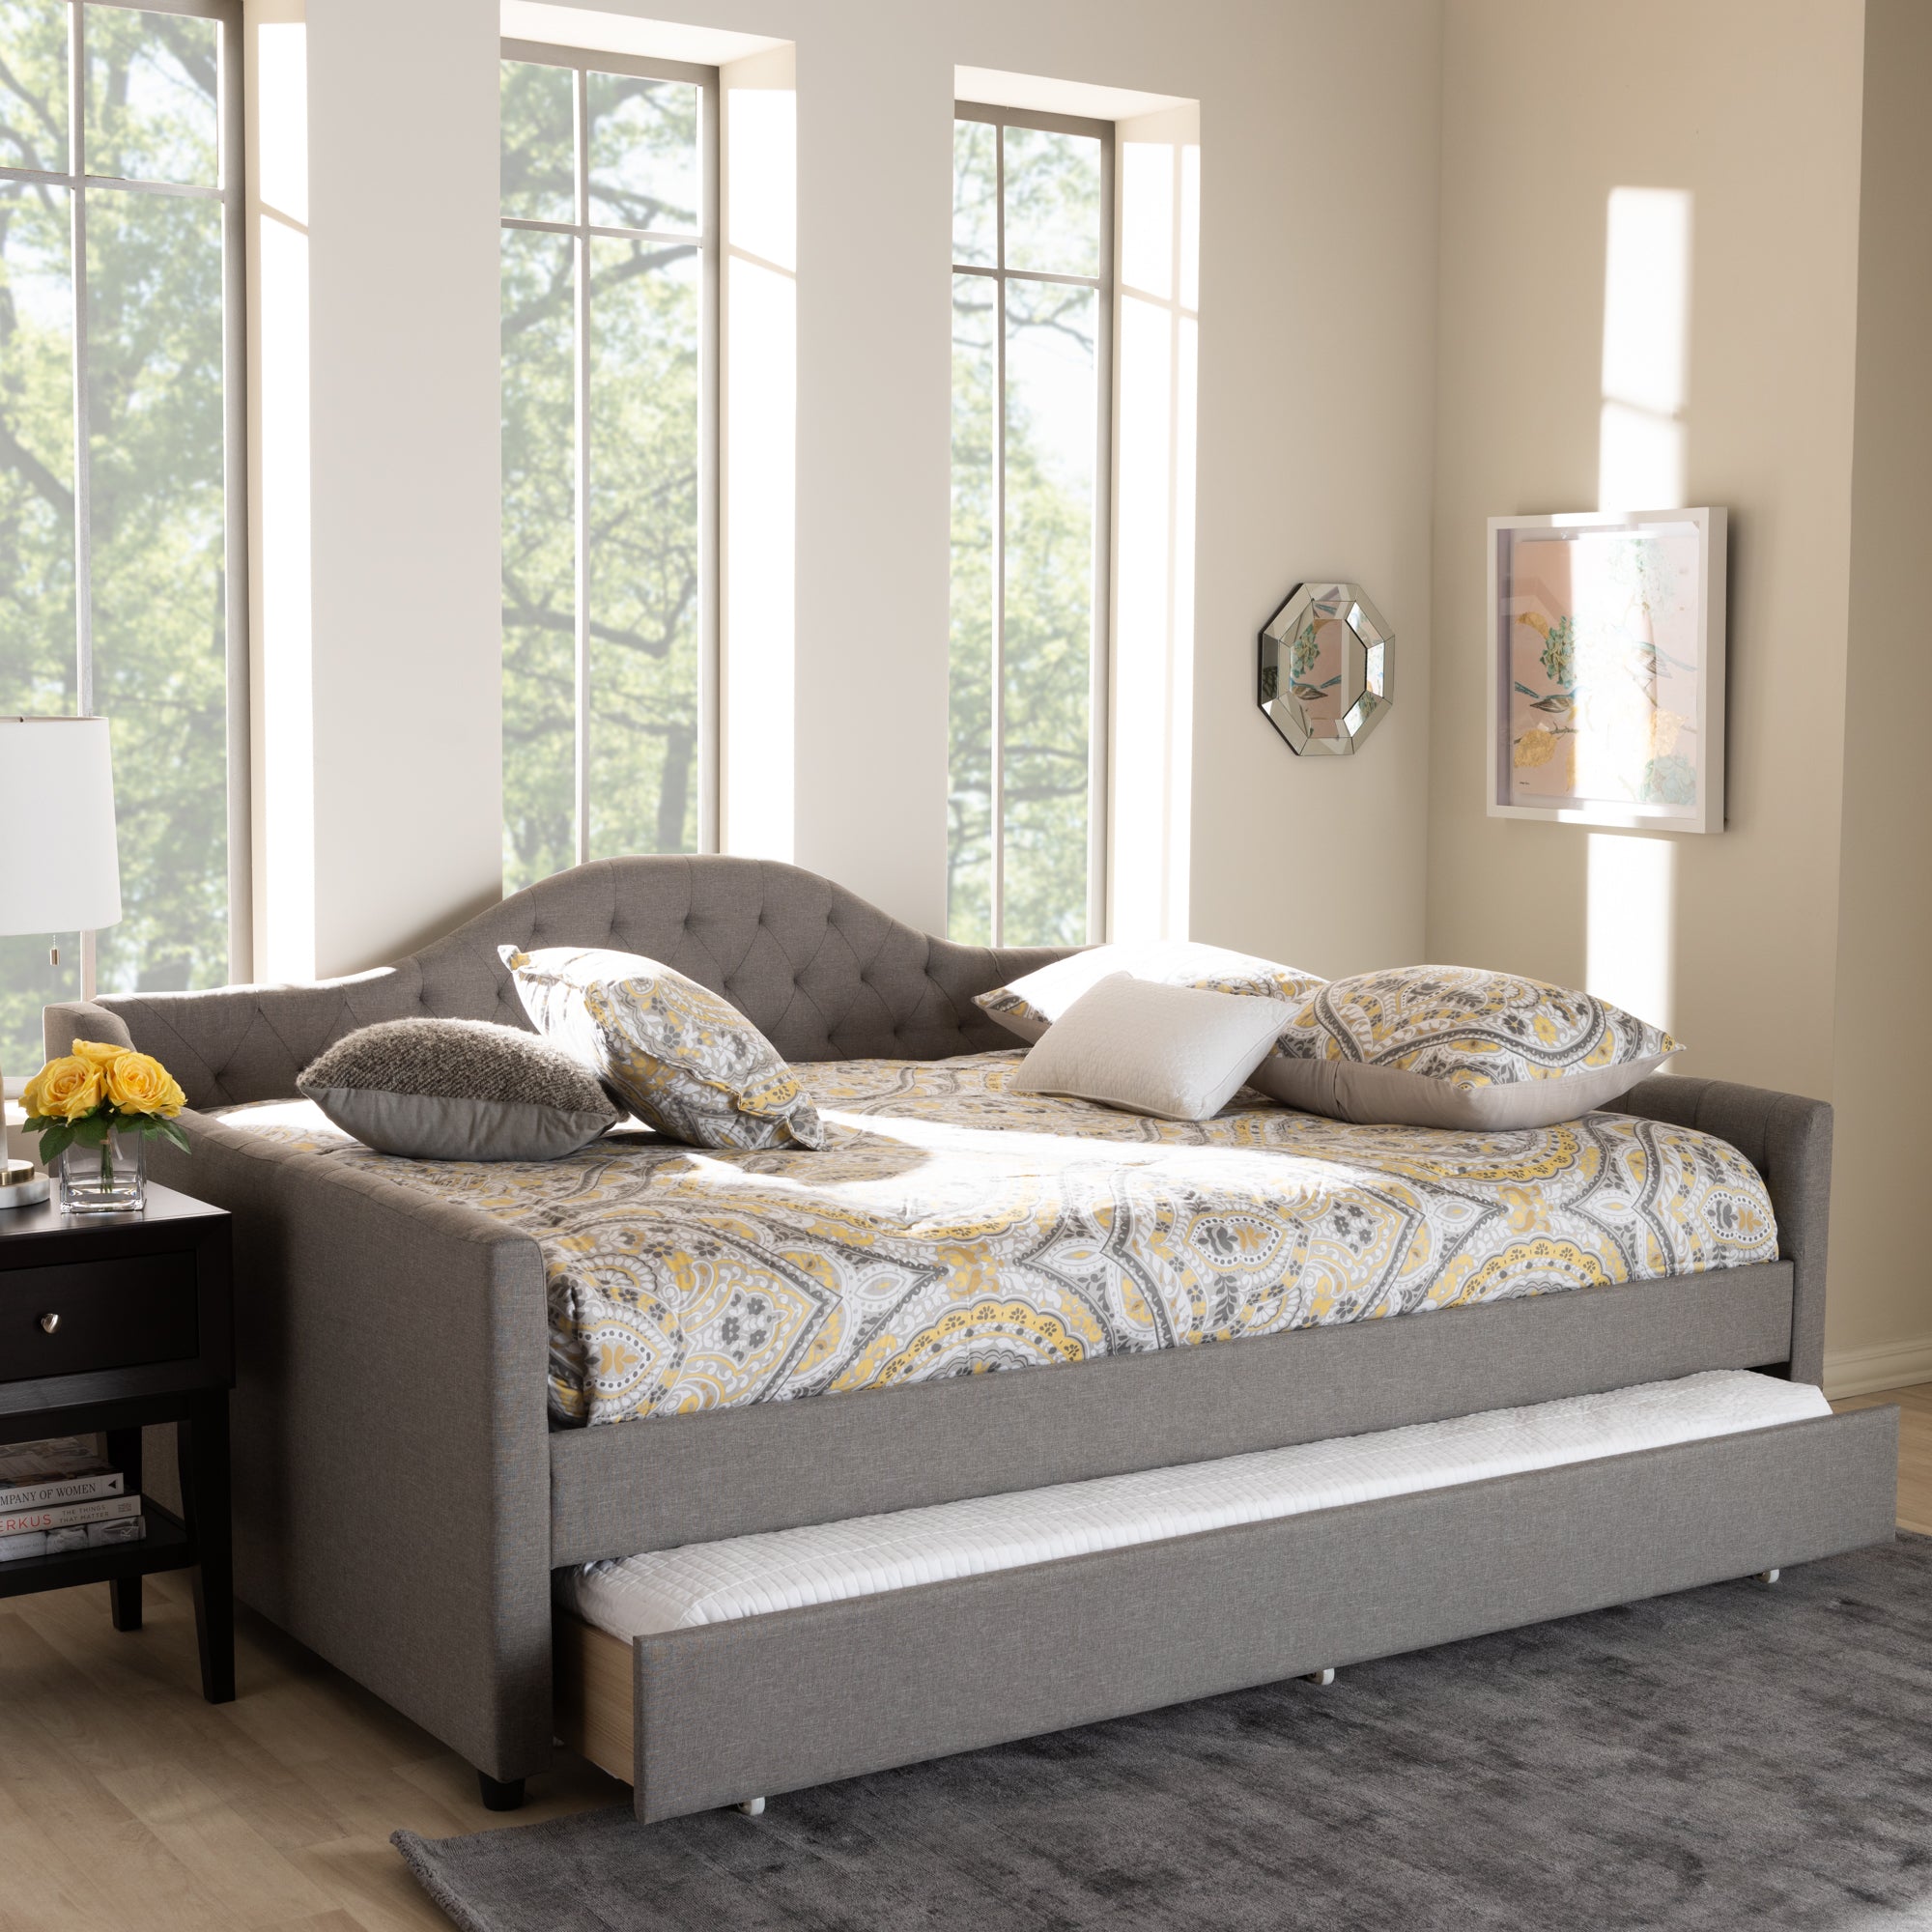 Eliza Contemporary Daybed with Trundle-Daybed & Trundle-Baxton Studio - WI-Wall2Wall Furnishings